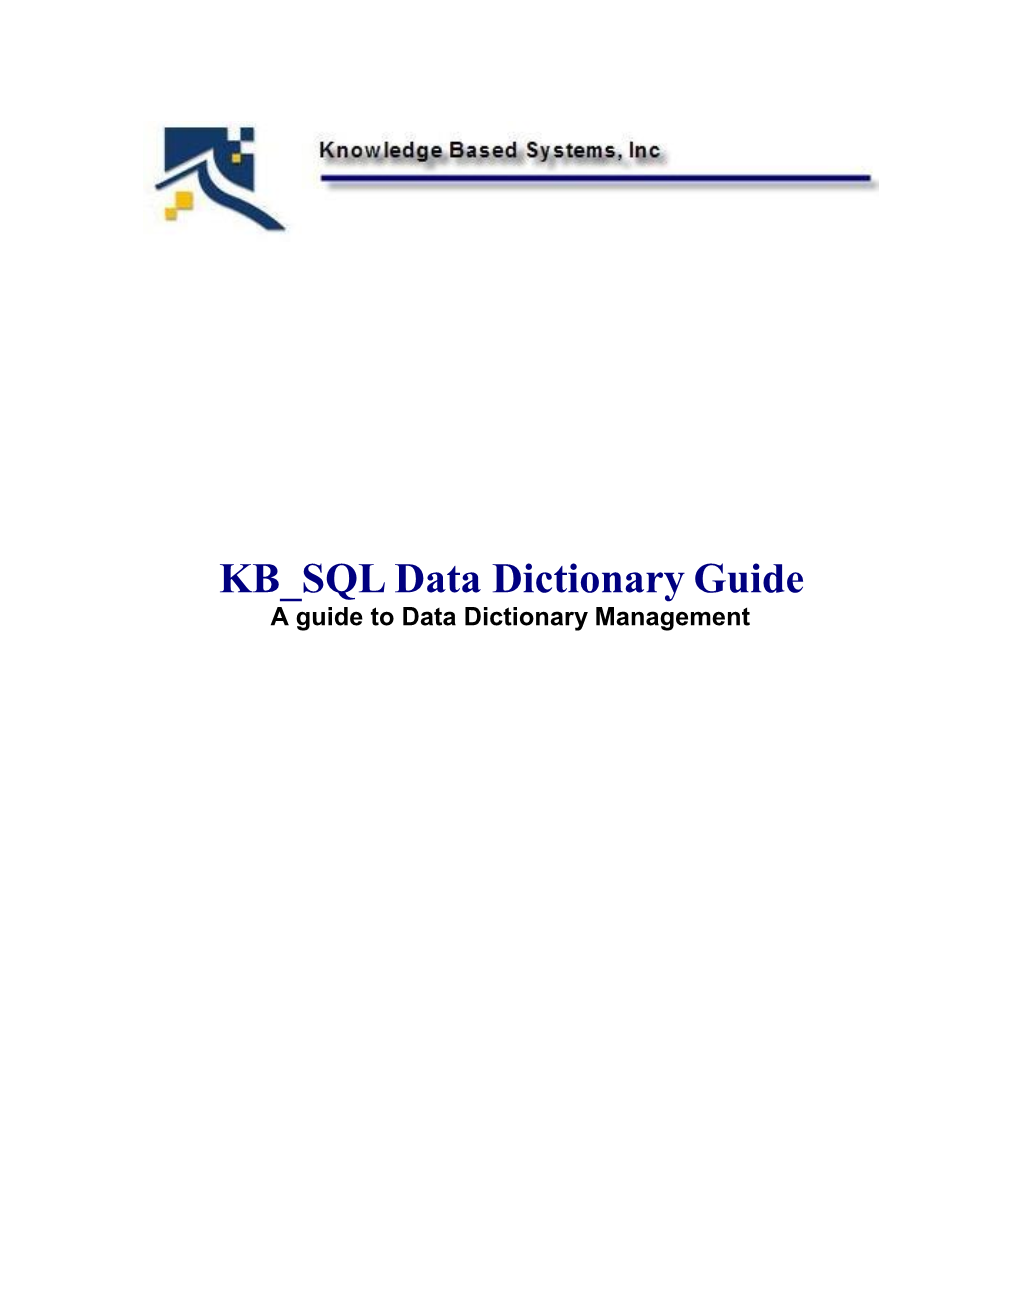 KB SQL Data Dictionary Guide a Guide to Data Dictionary Management © 1988-2019 by Knowledge Based Systems, Inc